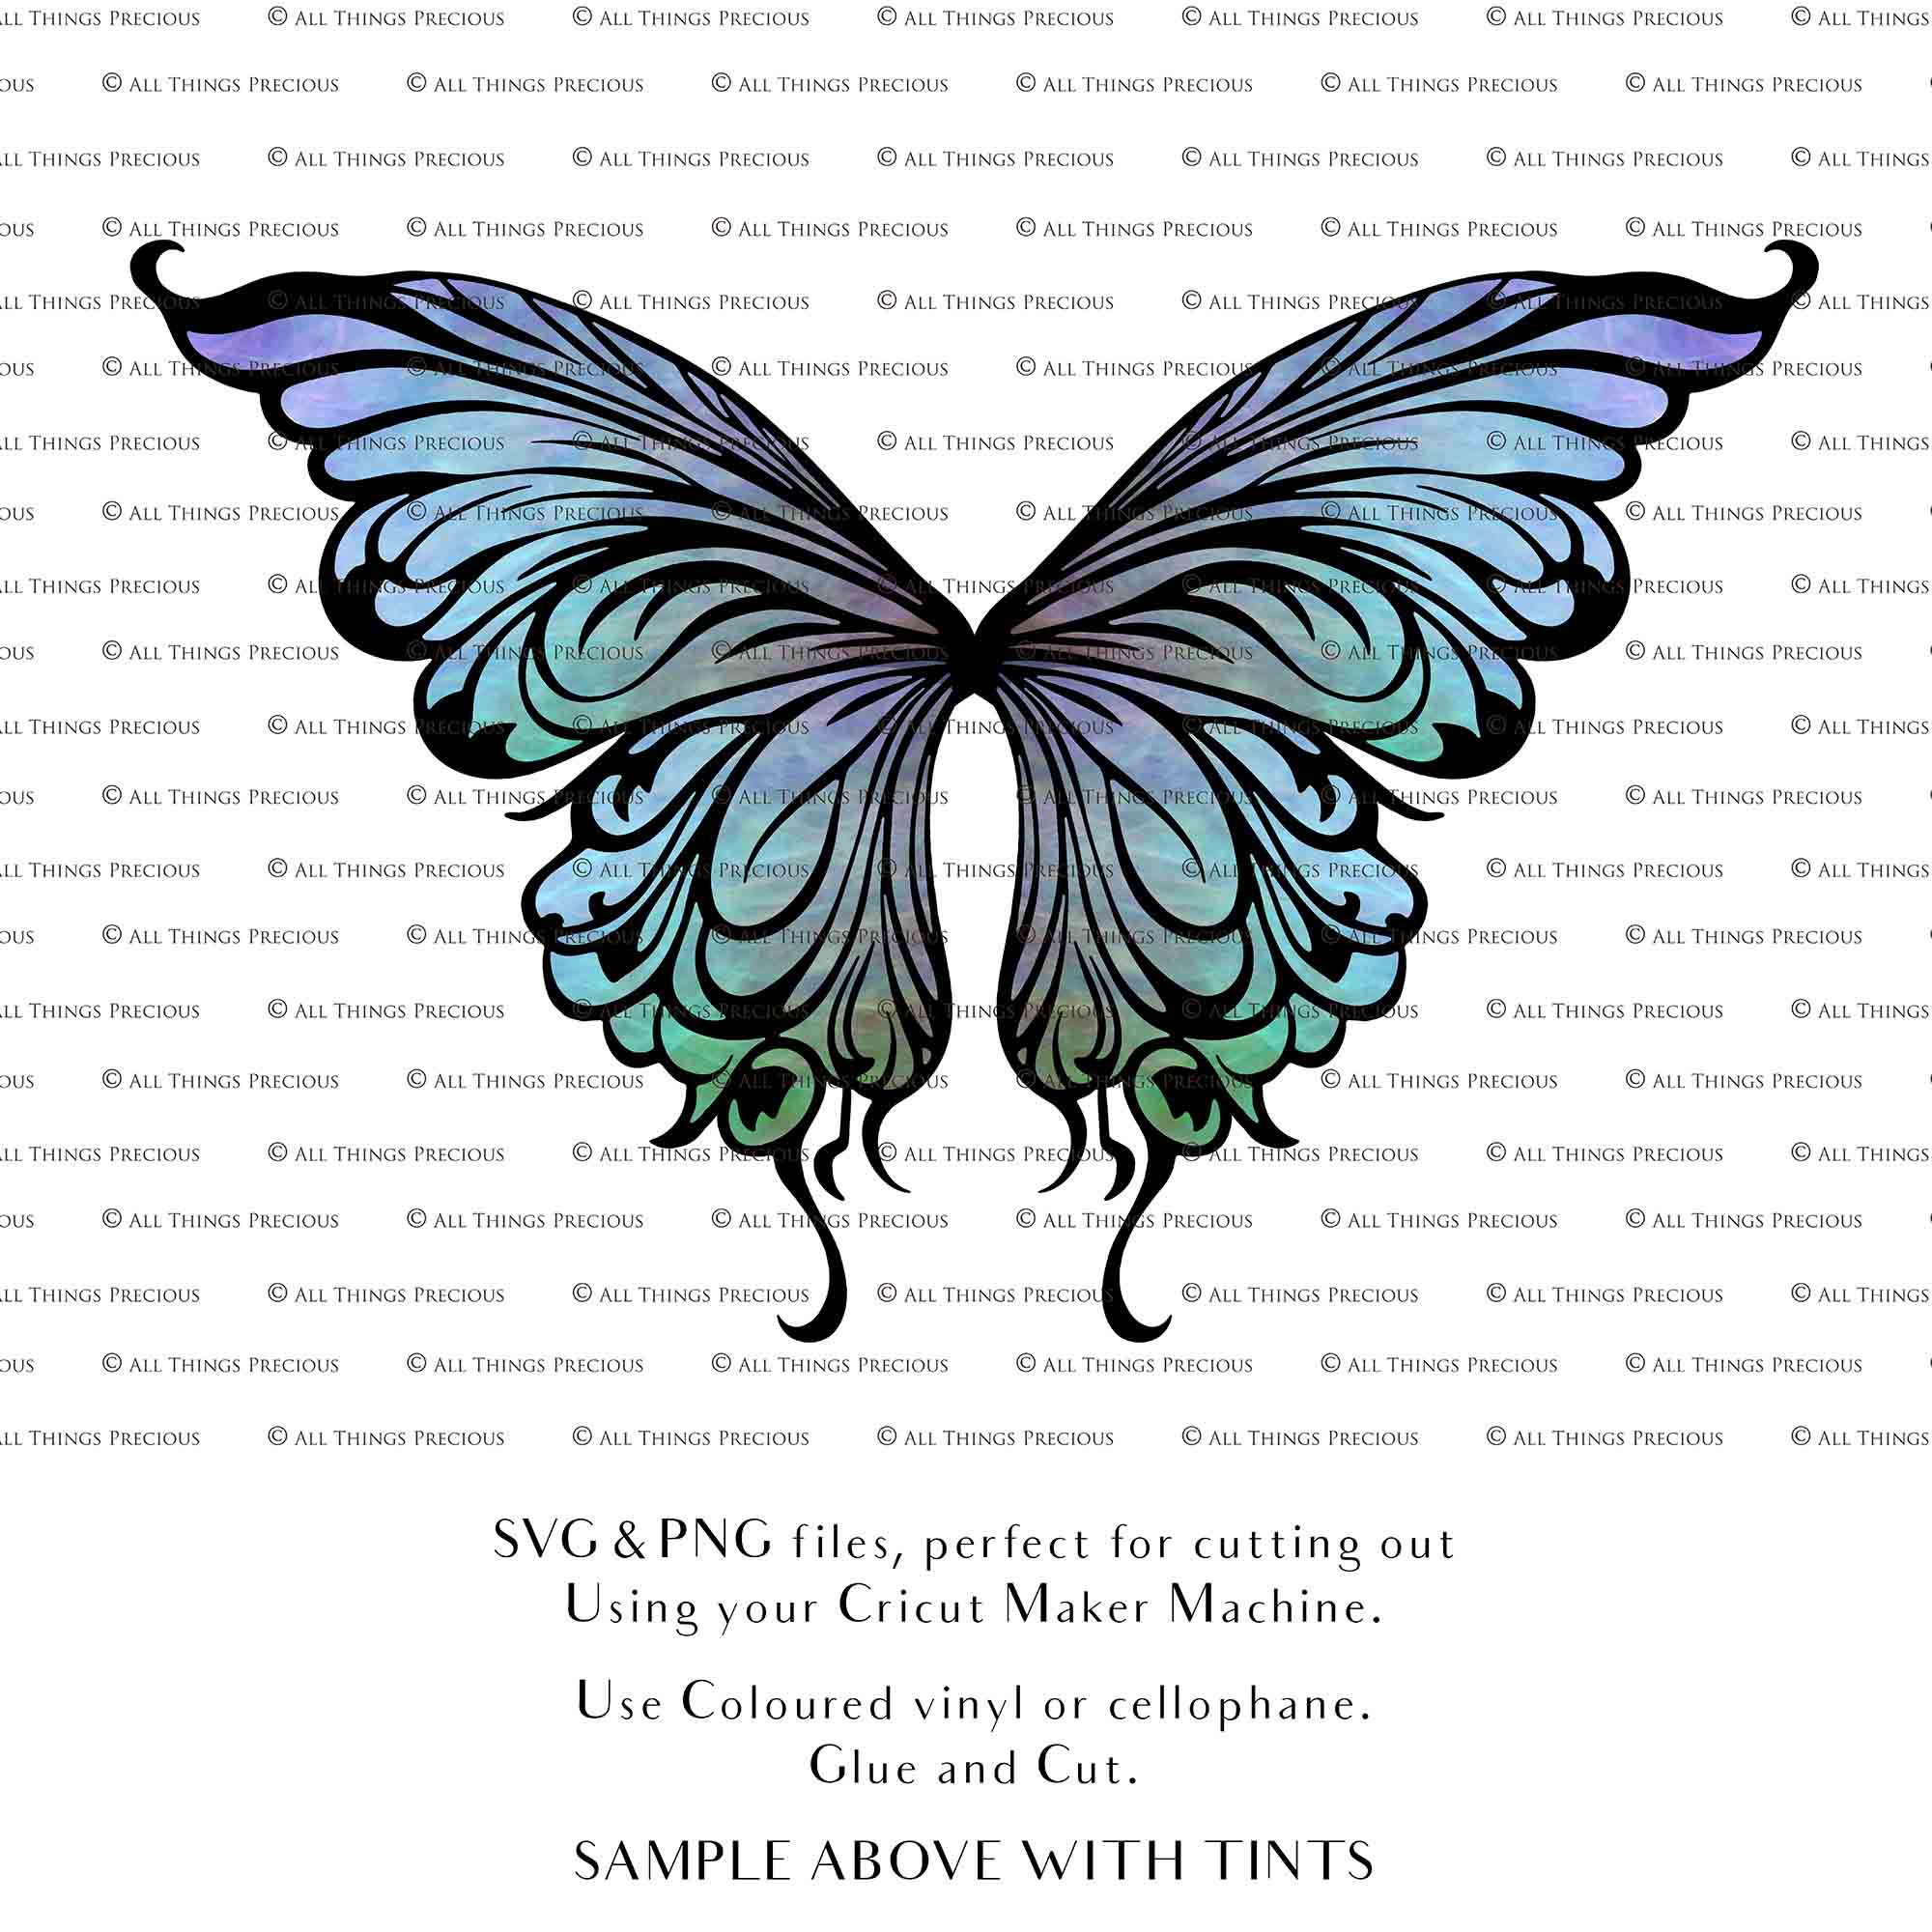 SVG & PNG Fairy Wing files for Cricut or Silhouette Cameo Cutting Machine. To create wearable fairy wings, in adult or children sizes.  Use this clipart design for Halloween Costumes, Fantasy or Cosplay or photography. Or use as ephemera in weddings, engagements or baby shower invitations. These are Individual wing parts, for you to cut and assemble. This is a digital product. 